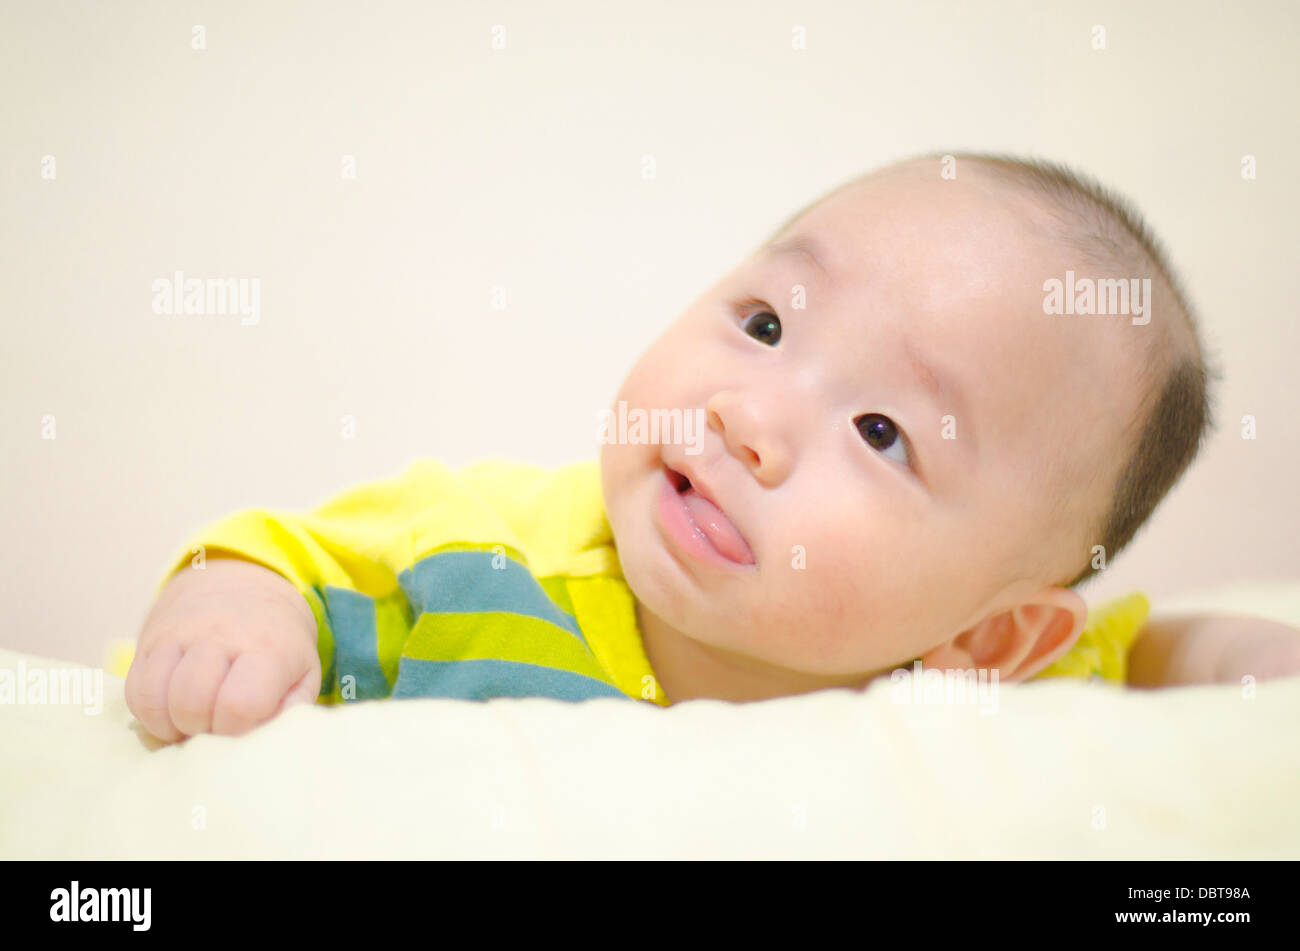 Cute infant smiling Stock Photo